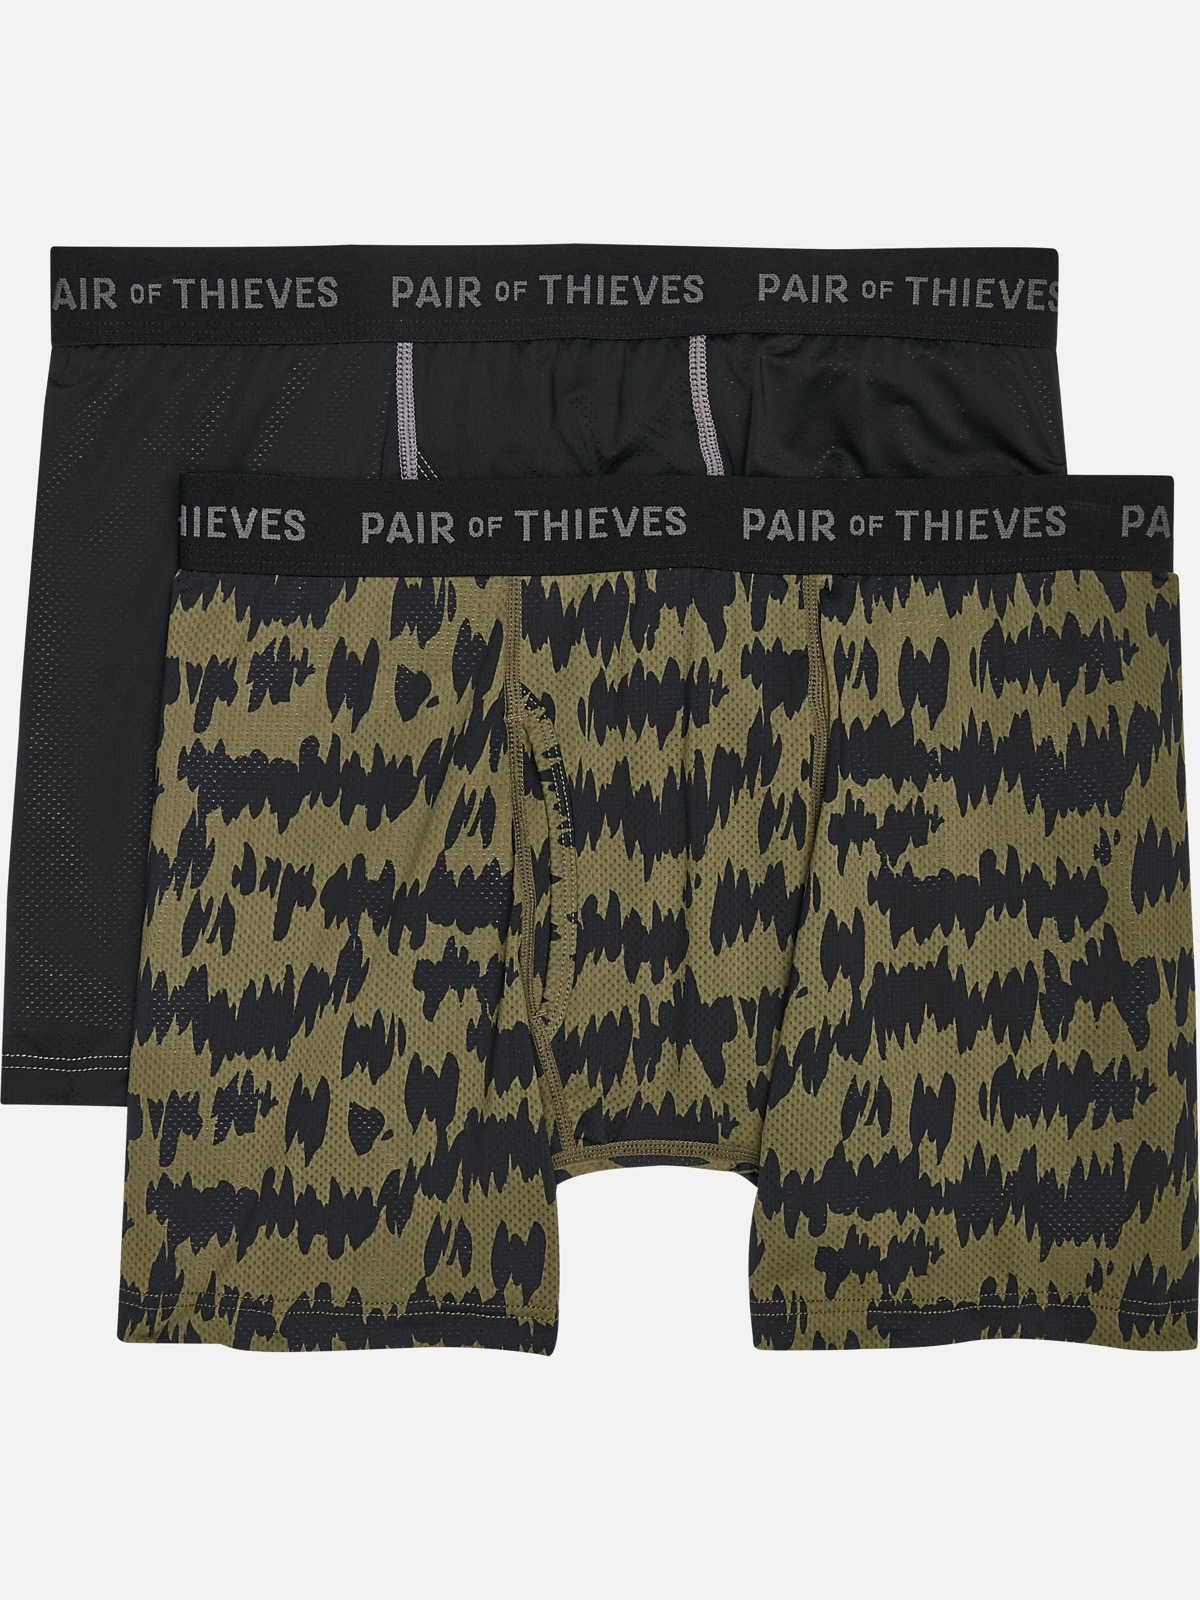 Pair Of Thieves Boxer Briefs | All Sale| Men's Wearhouse